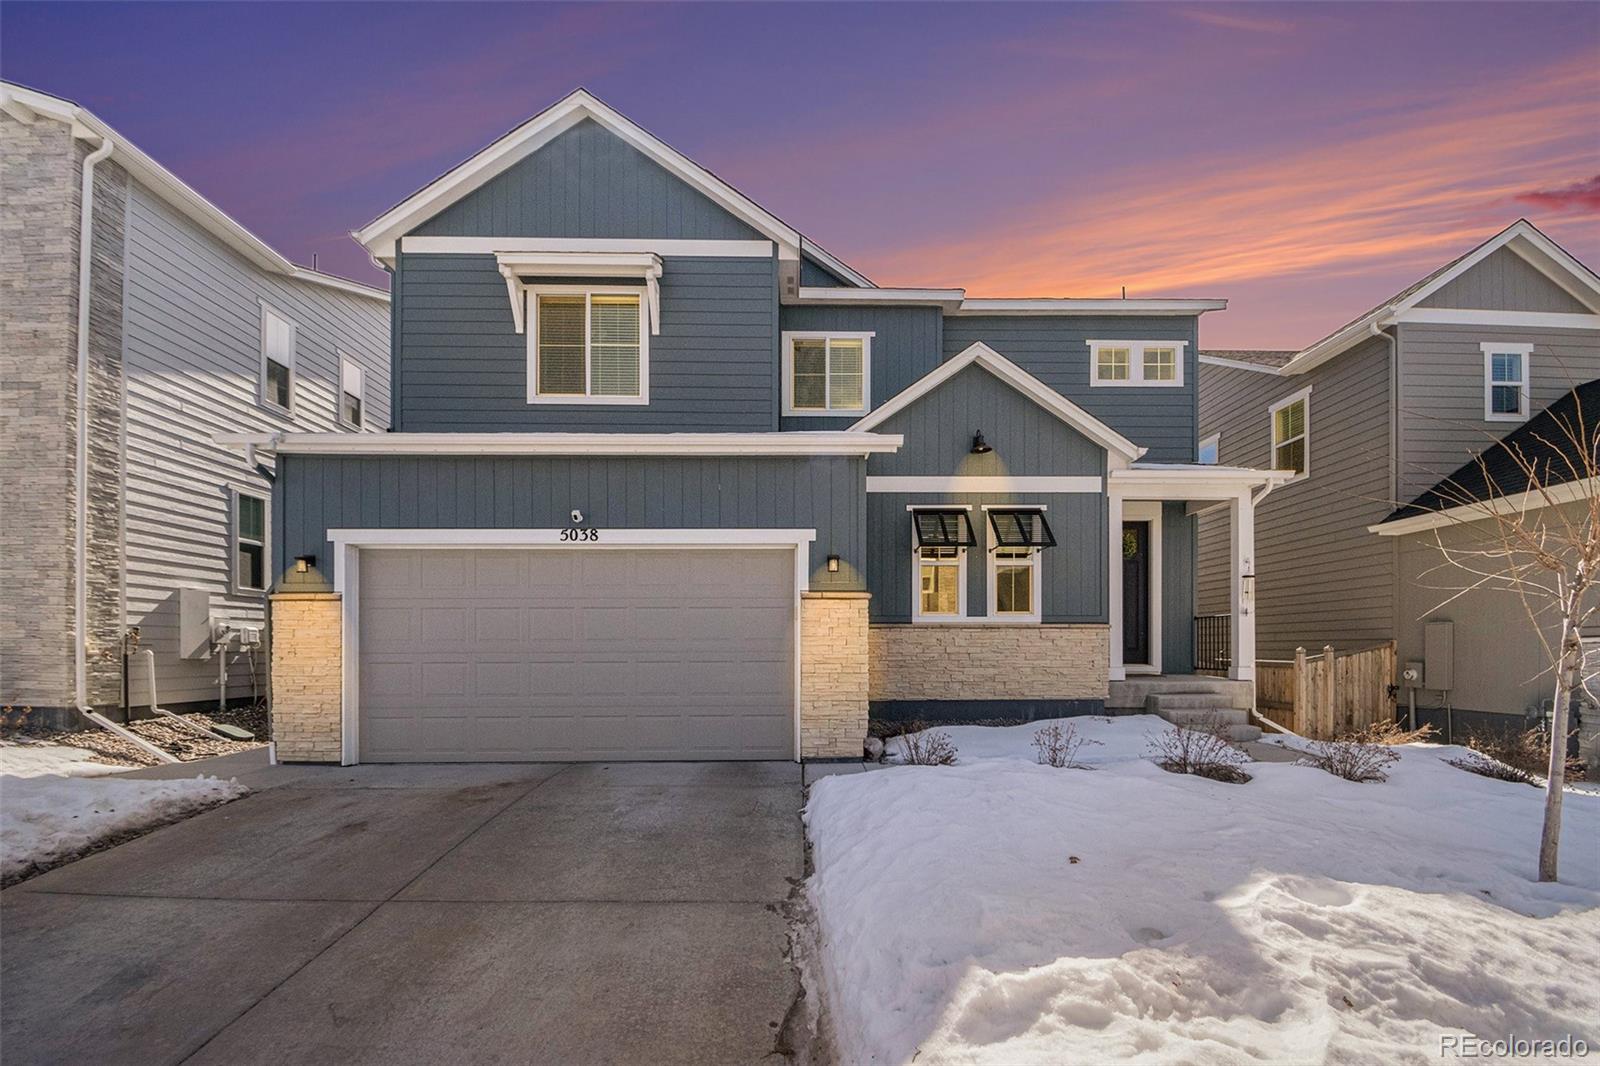 5038  Coulee Trail, castle rock MLS: 7529042 Beds: 5 Baths: 5 Price: $785,000